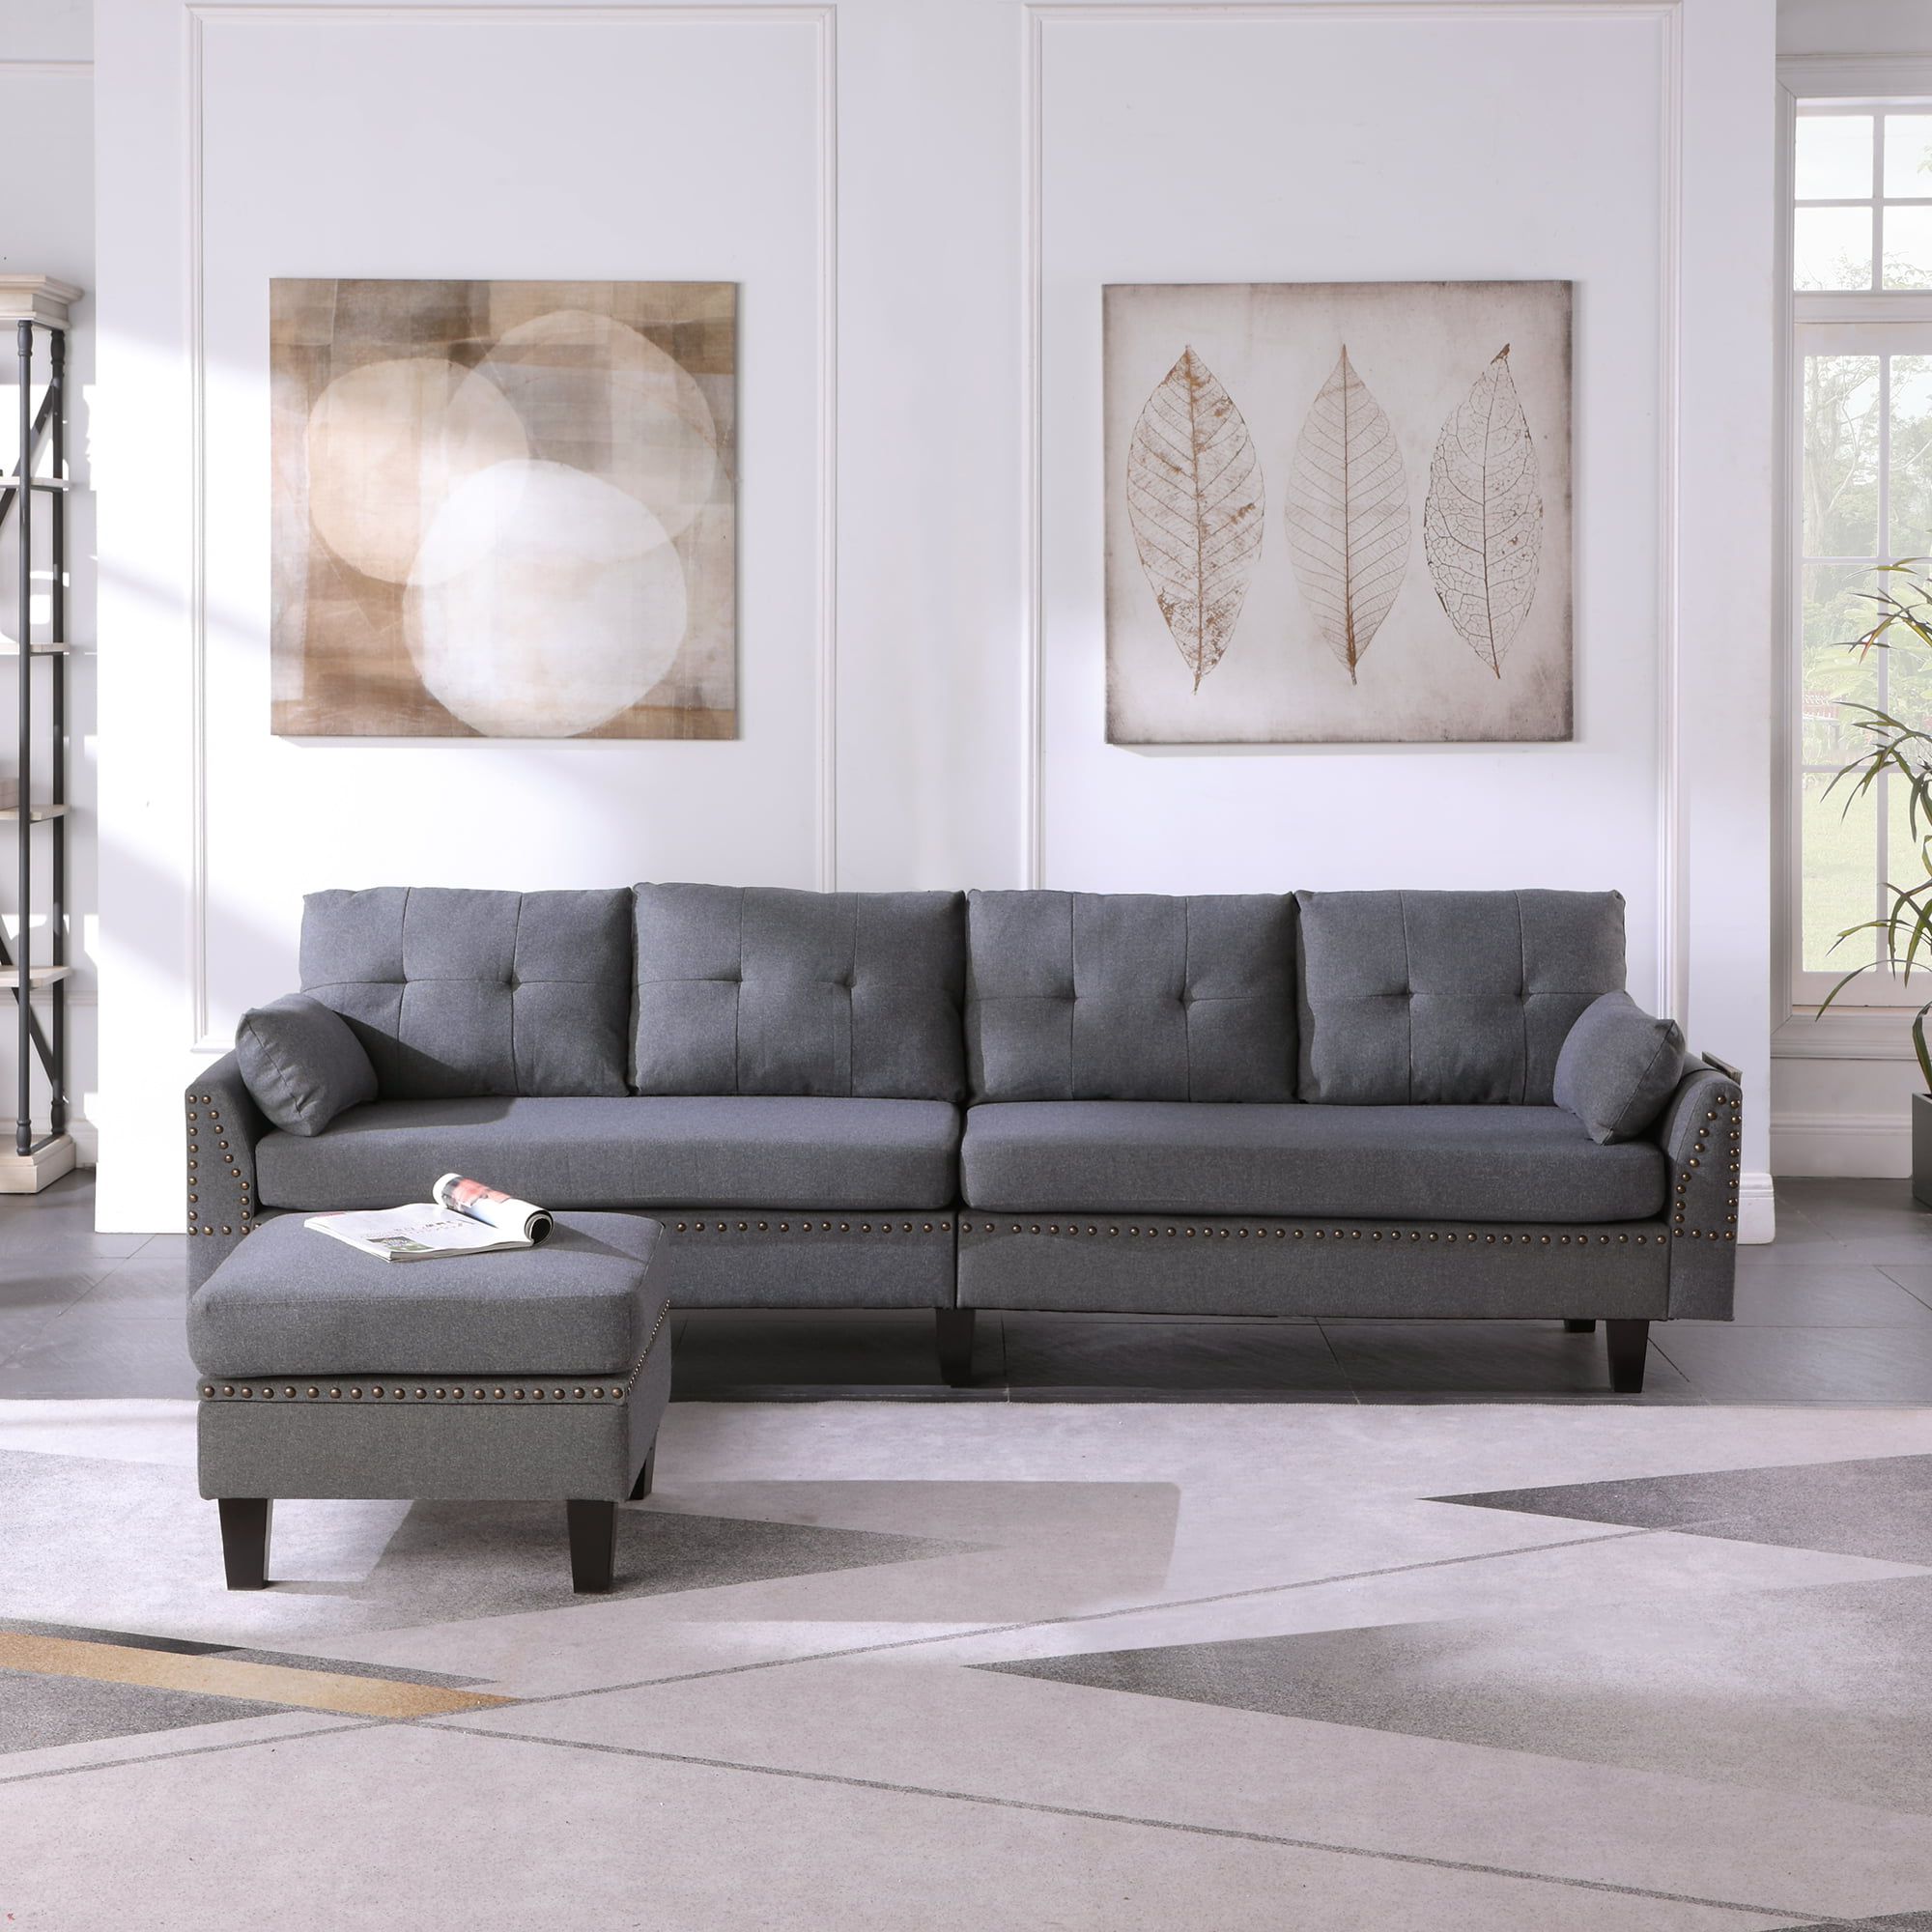 Urhomepro Mid Century Couches And Sofas With Ottoman, 2 Pillows, Modern Regarding Sofas With Ottomans (View 18 of 20)